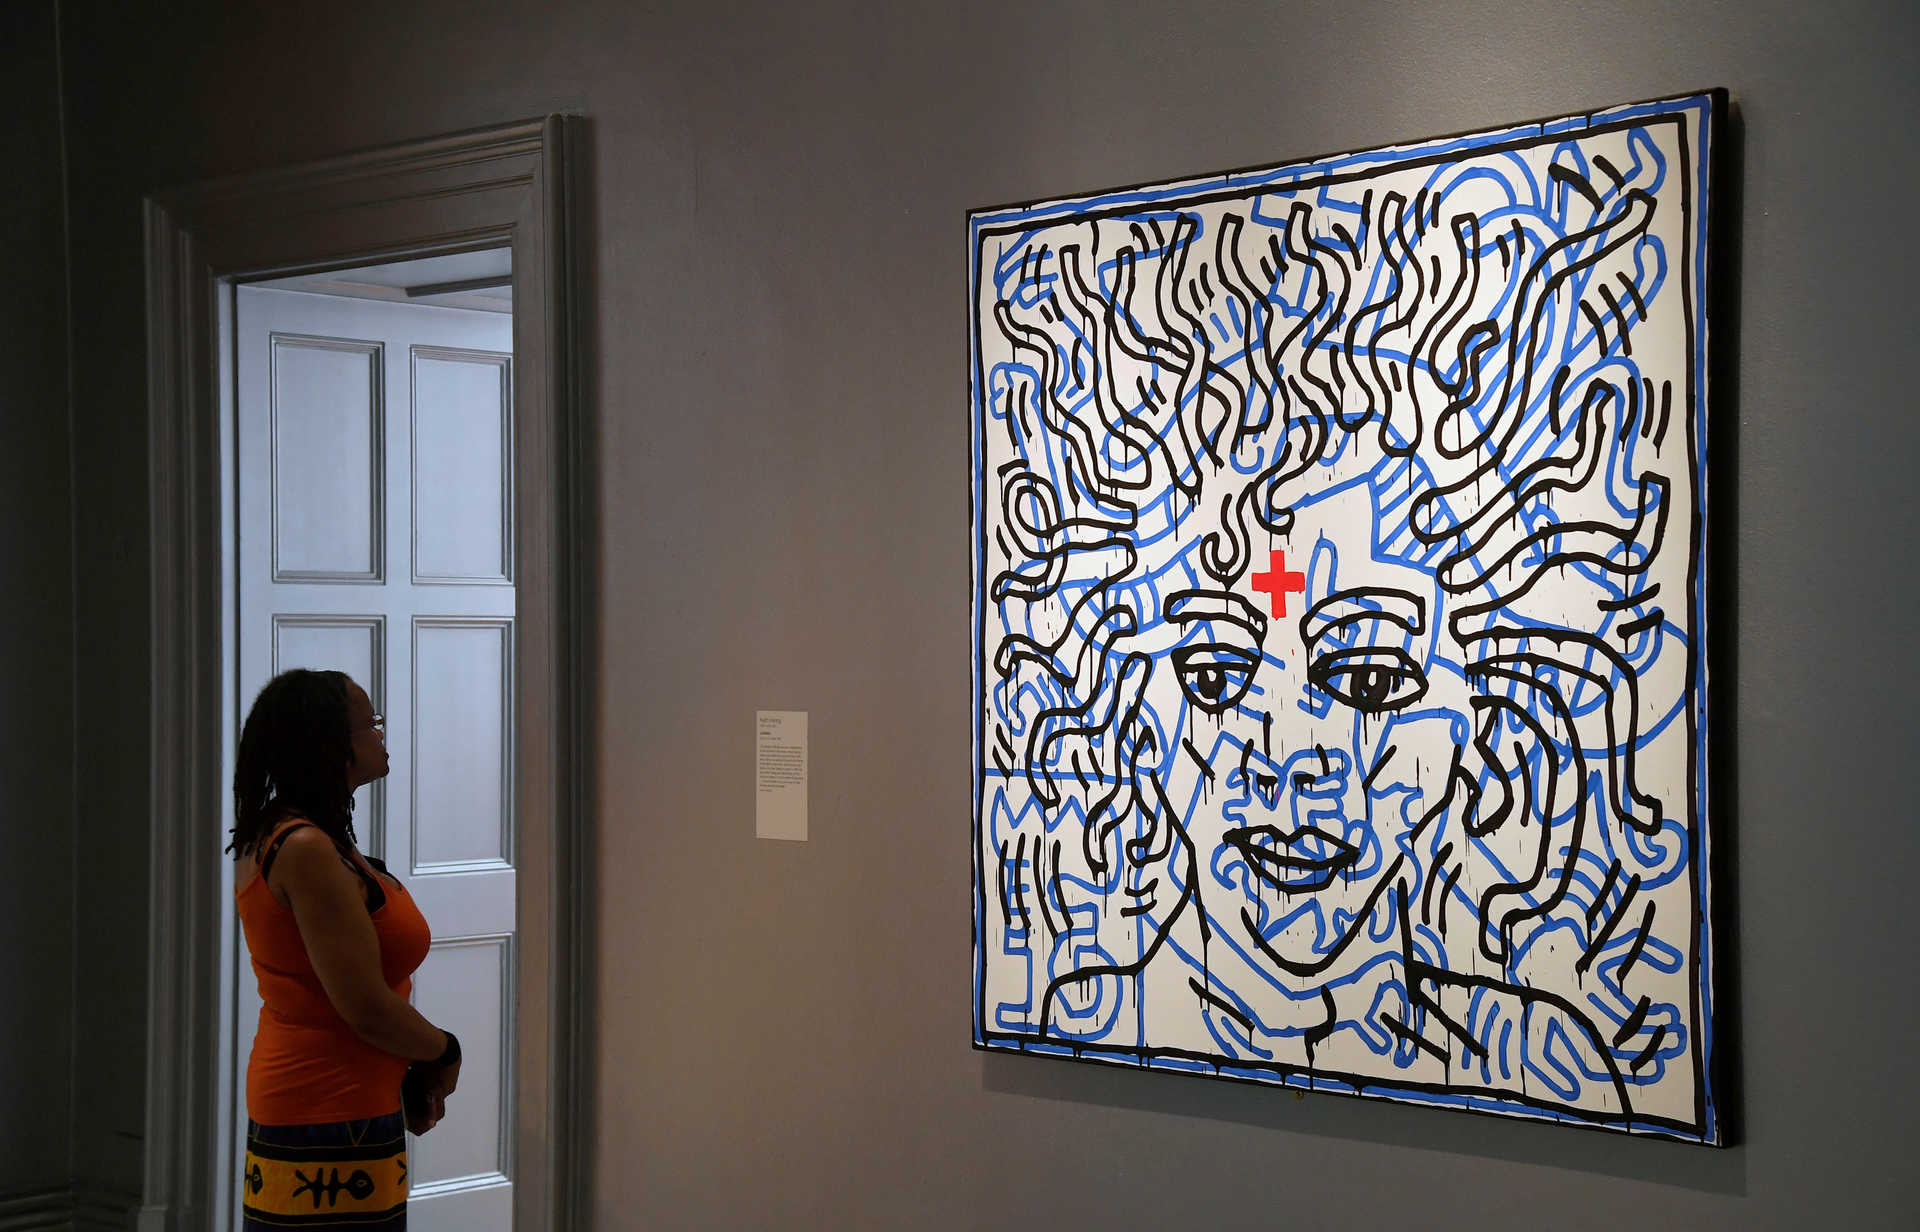 A visitor views Untitled by Keith Haring which forms part of the exhibition ‘Michael Jackson: On The Wall’ at the National Portrait Gallery in London, Britain